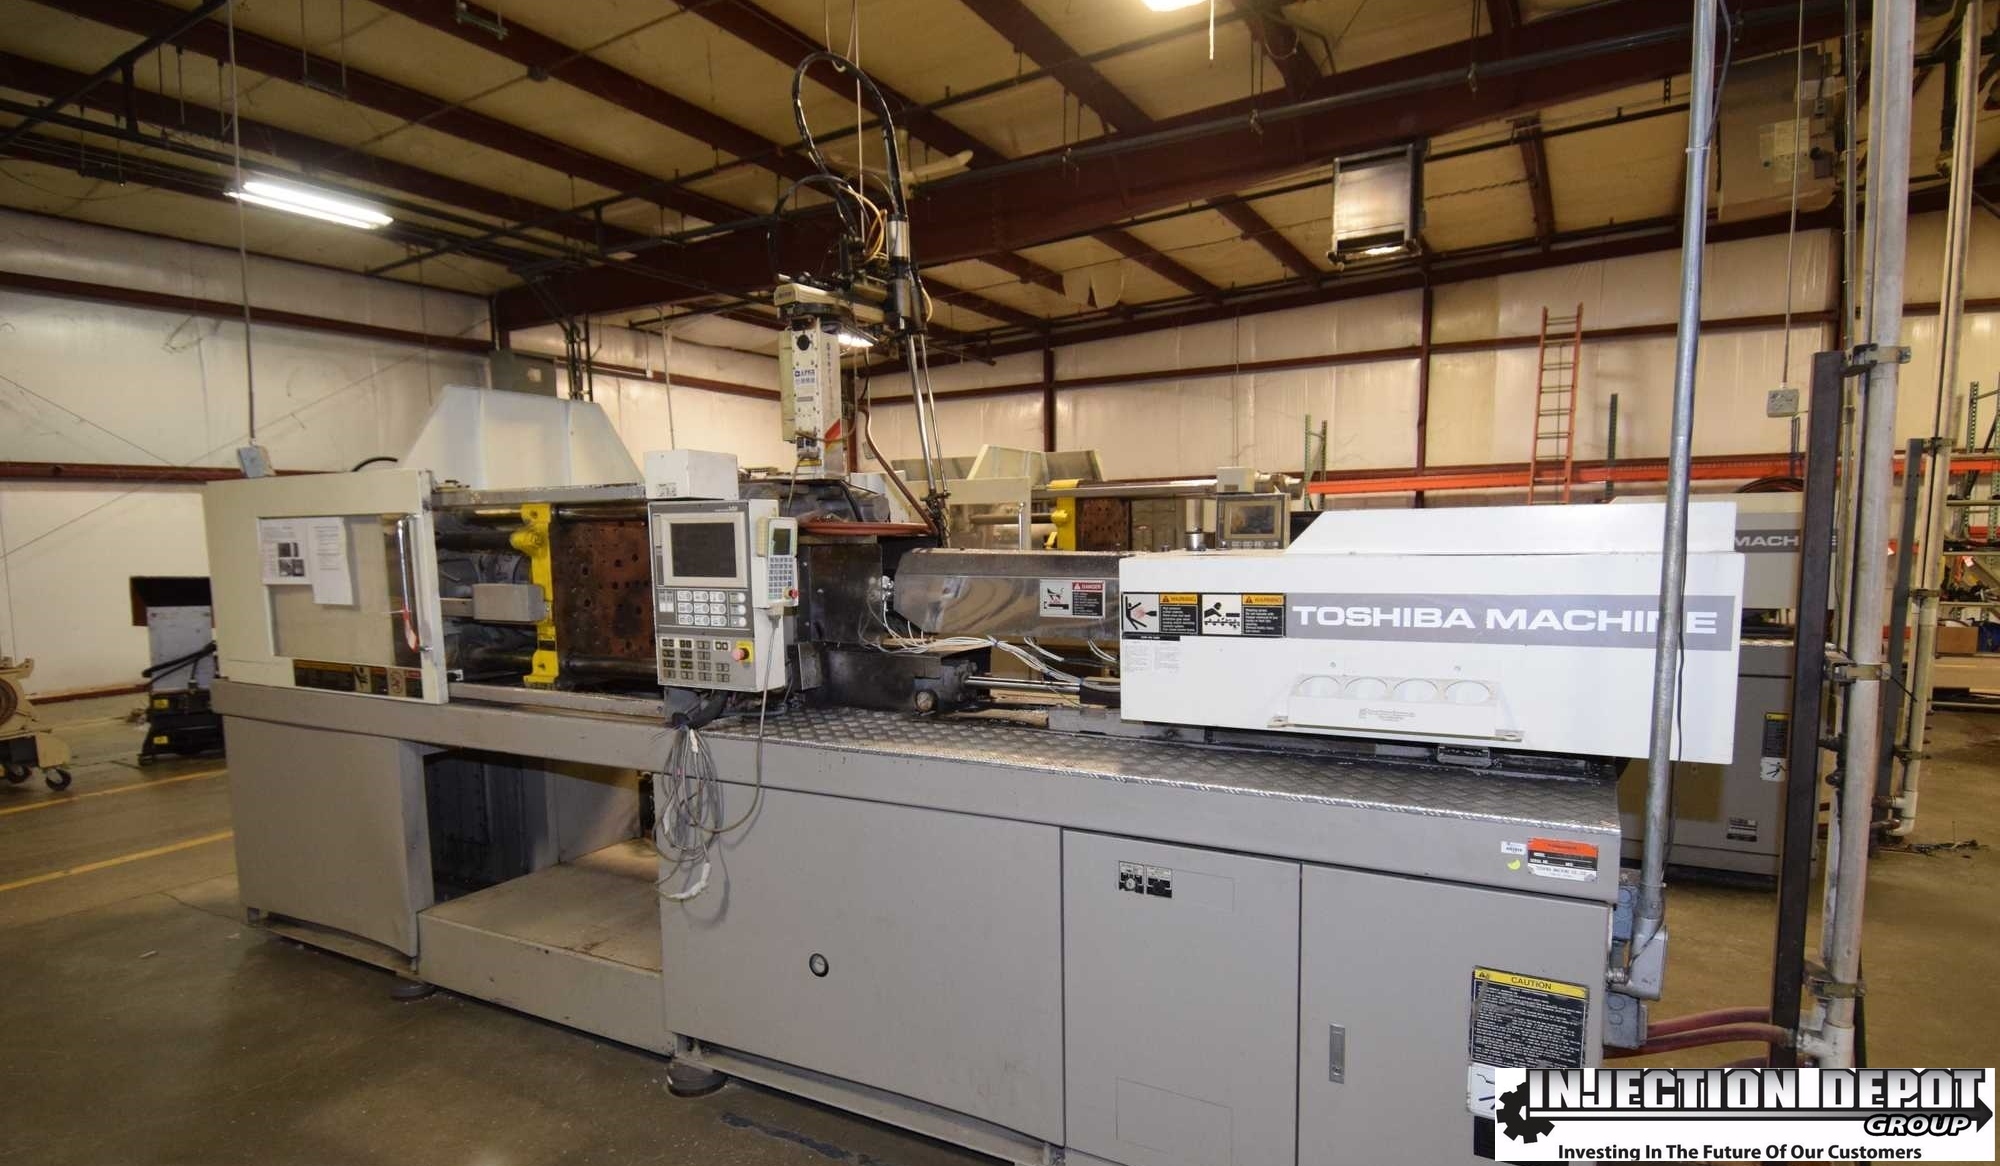 1999 TOSHIBA MACHINE ISG120NV10-5A Horizontal Injection Moulding Machines | INJECTION DEPOT GROUP